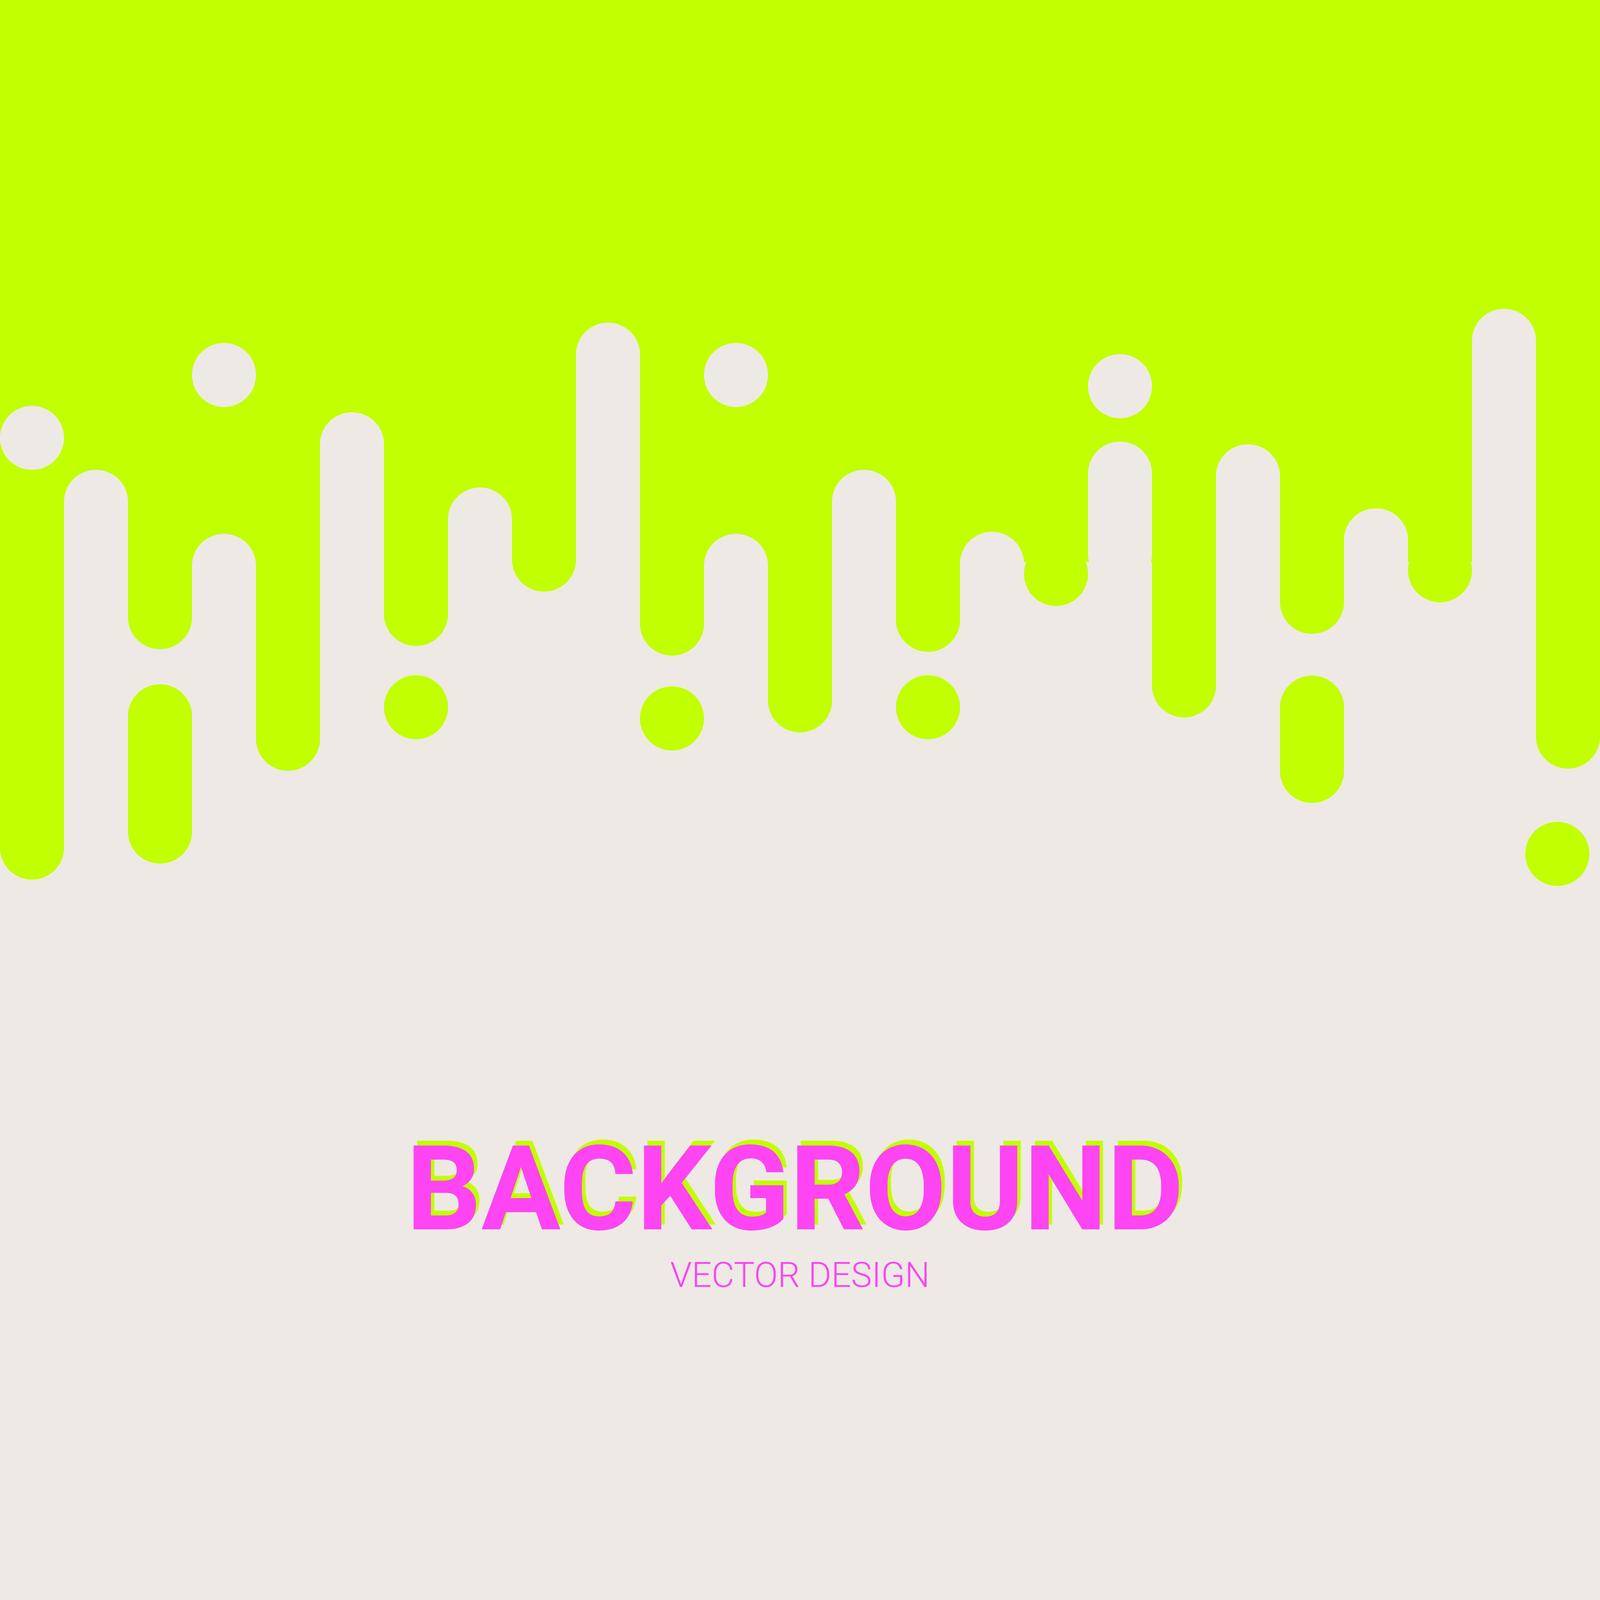 Abstract backgrounds with color rounded shapes.Vector illustration. Rounded lines halftone style. Element for design